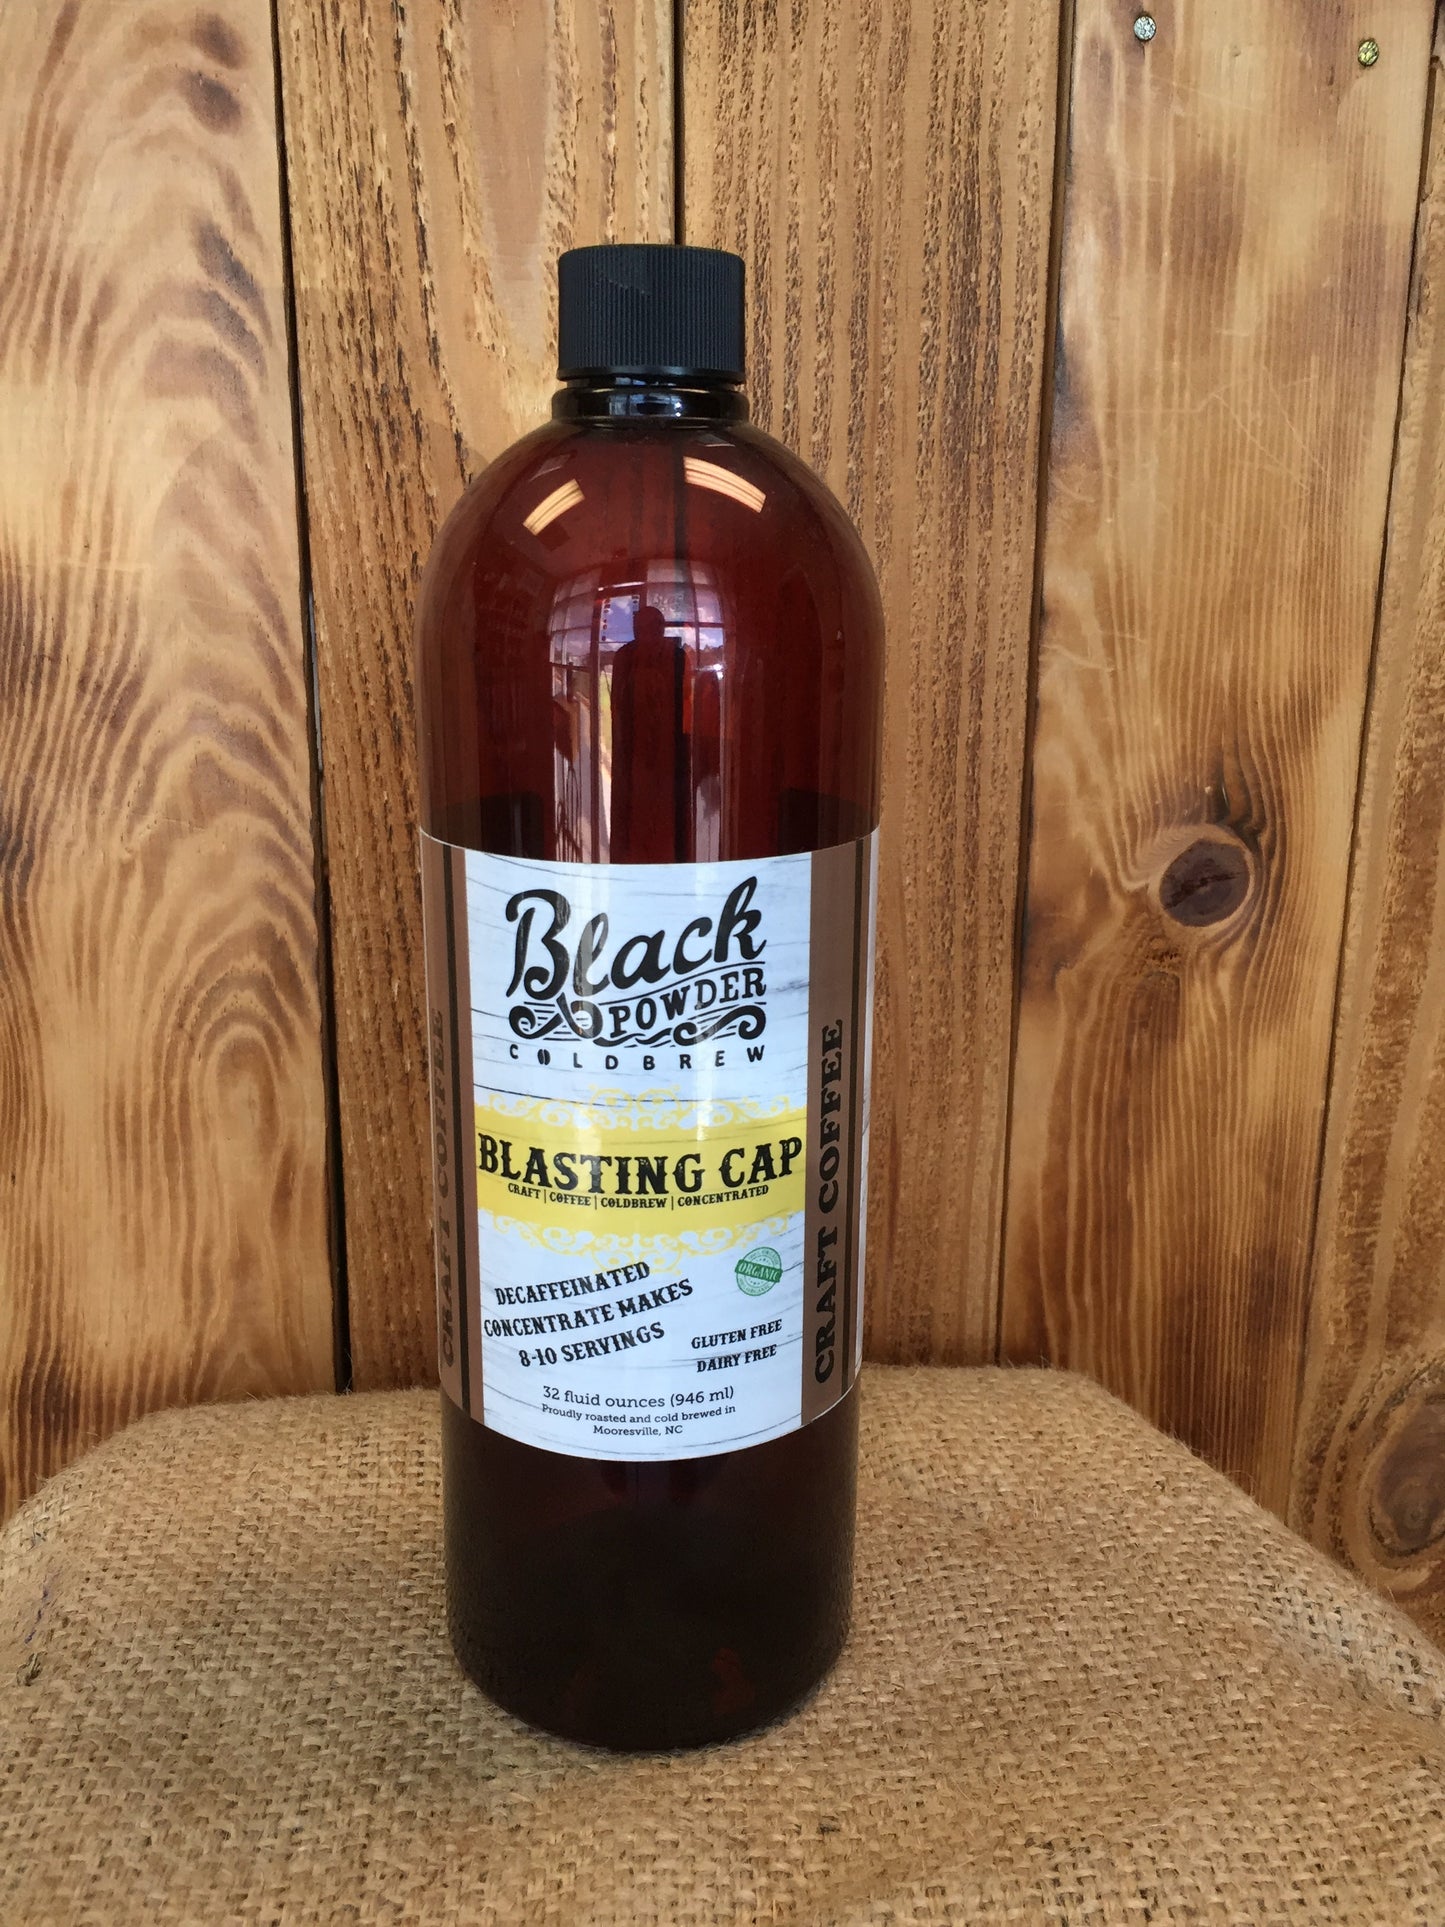 Blasting Cap Cold Brew Coffee Blend | Decaf Naturally Grown by Black Powder Coffee